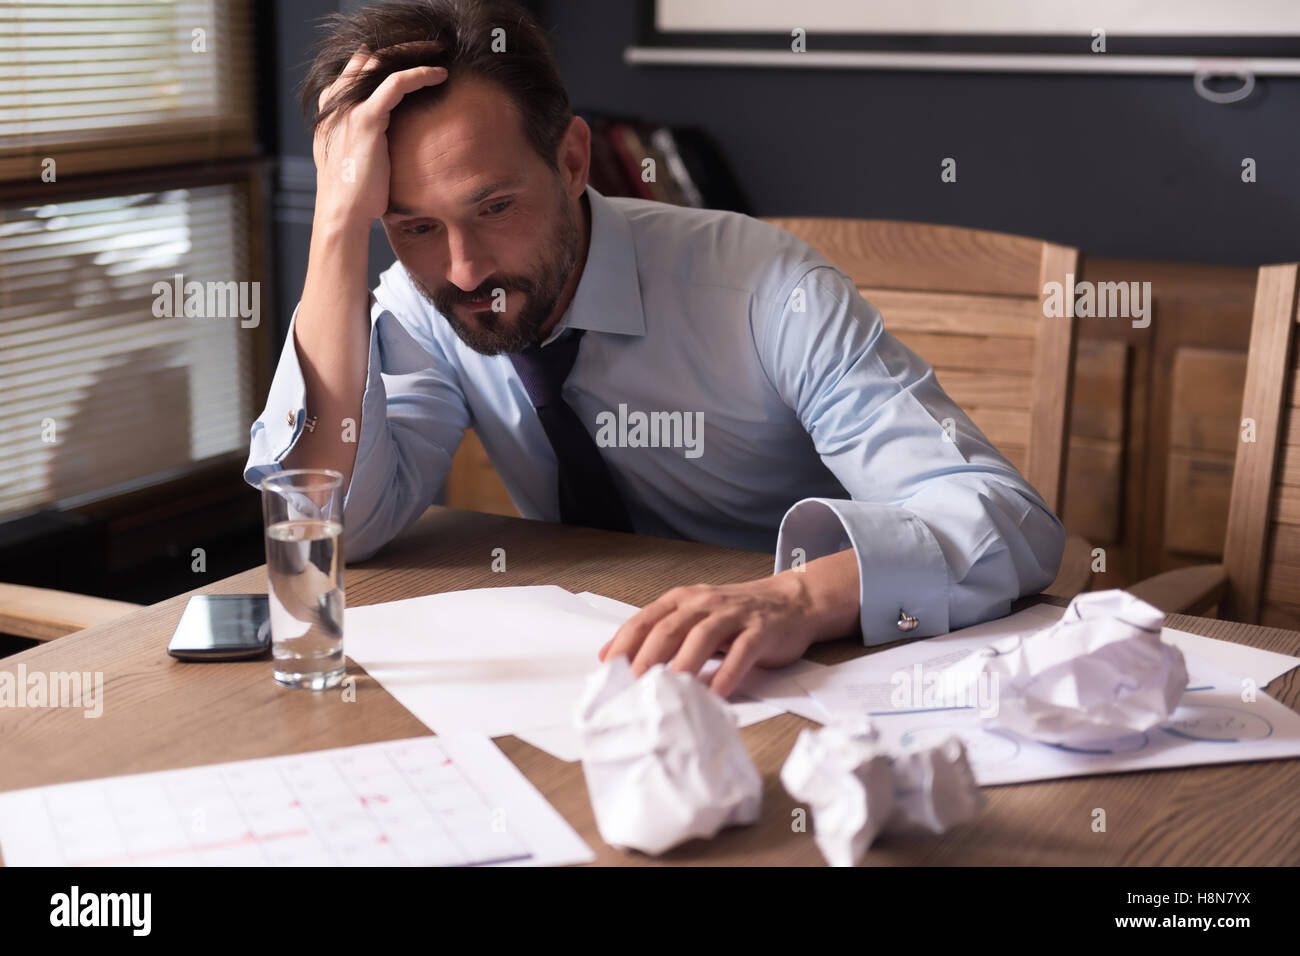 Exhausted cheerless man working long hours Stock Photo